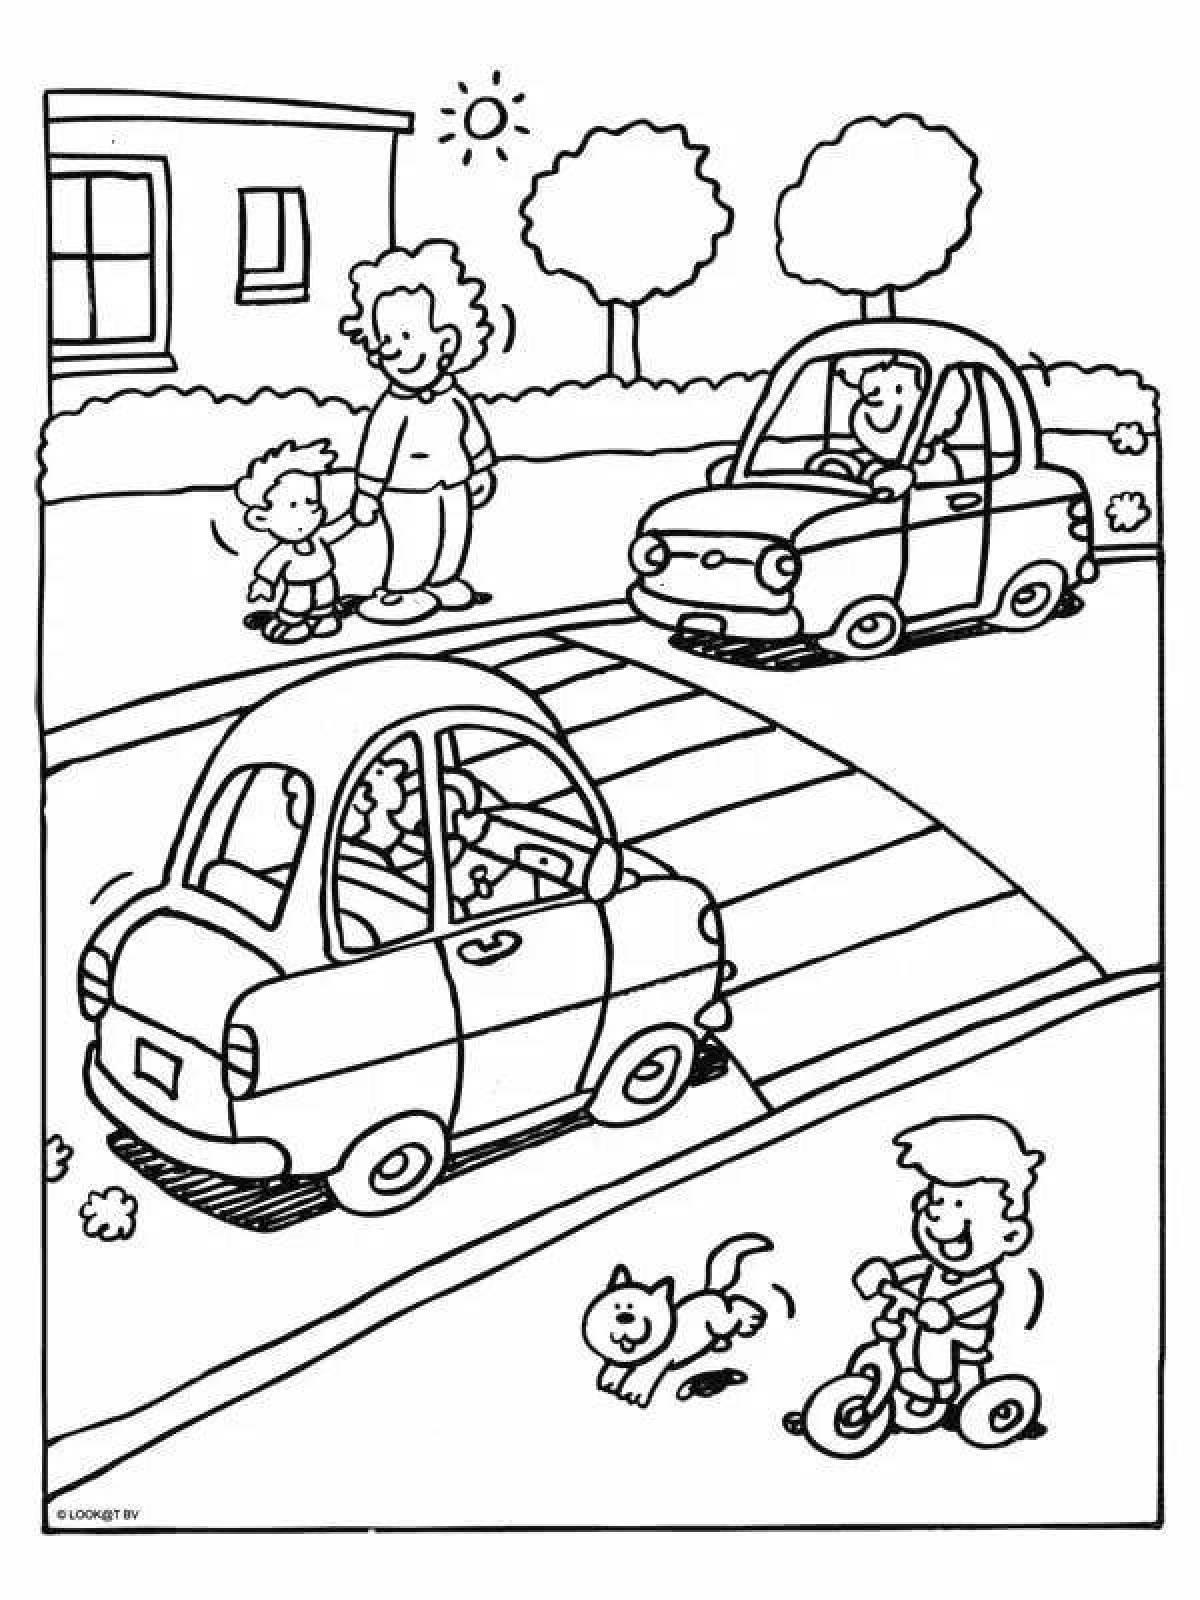 According to traffic rules for children 6 7 years old #2